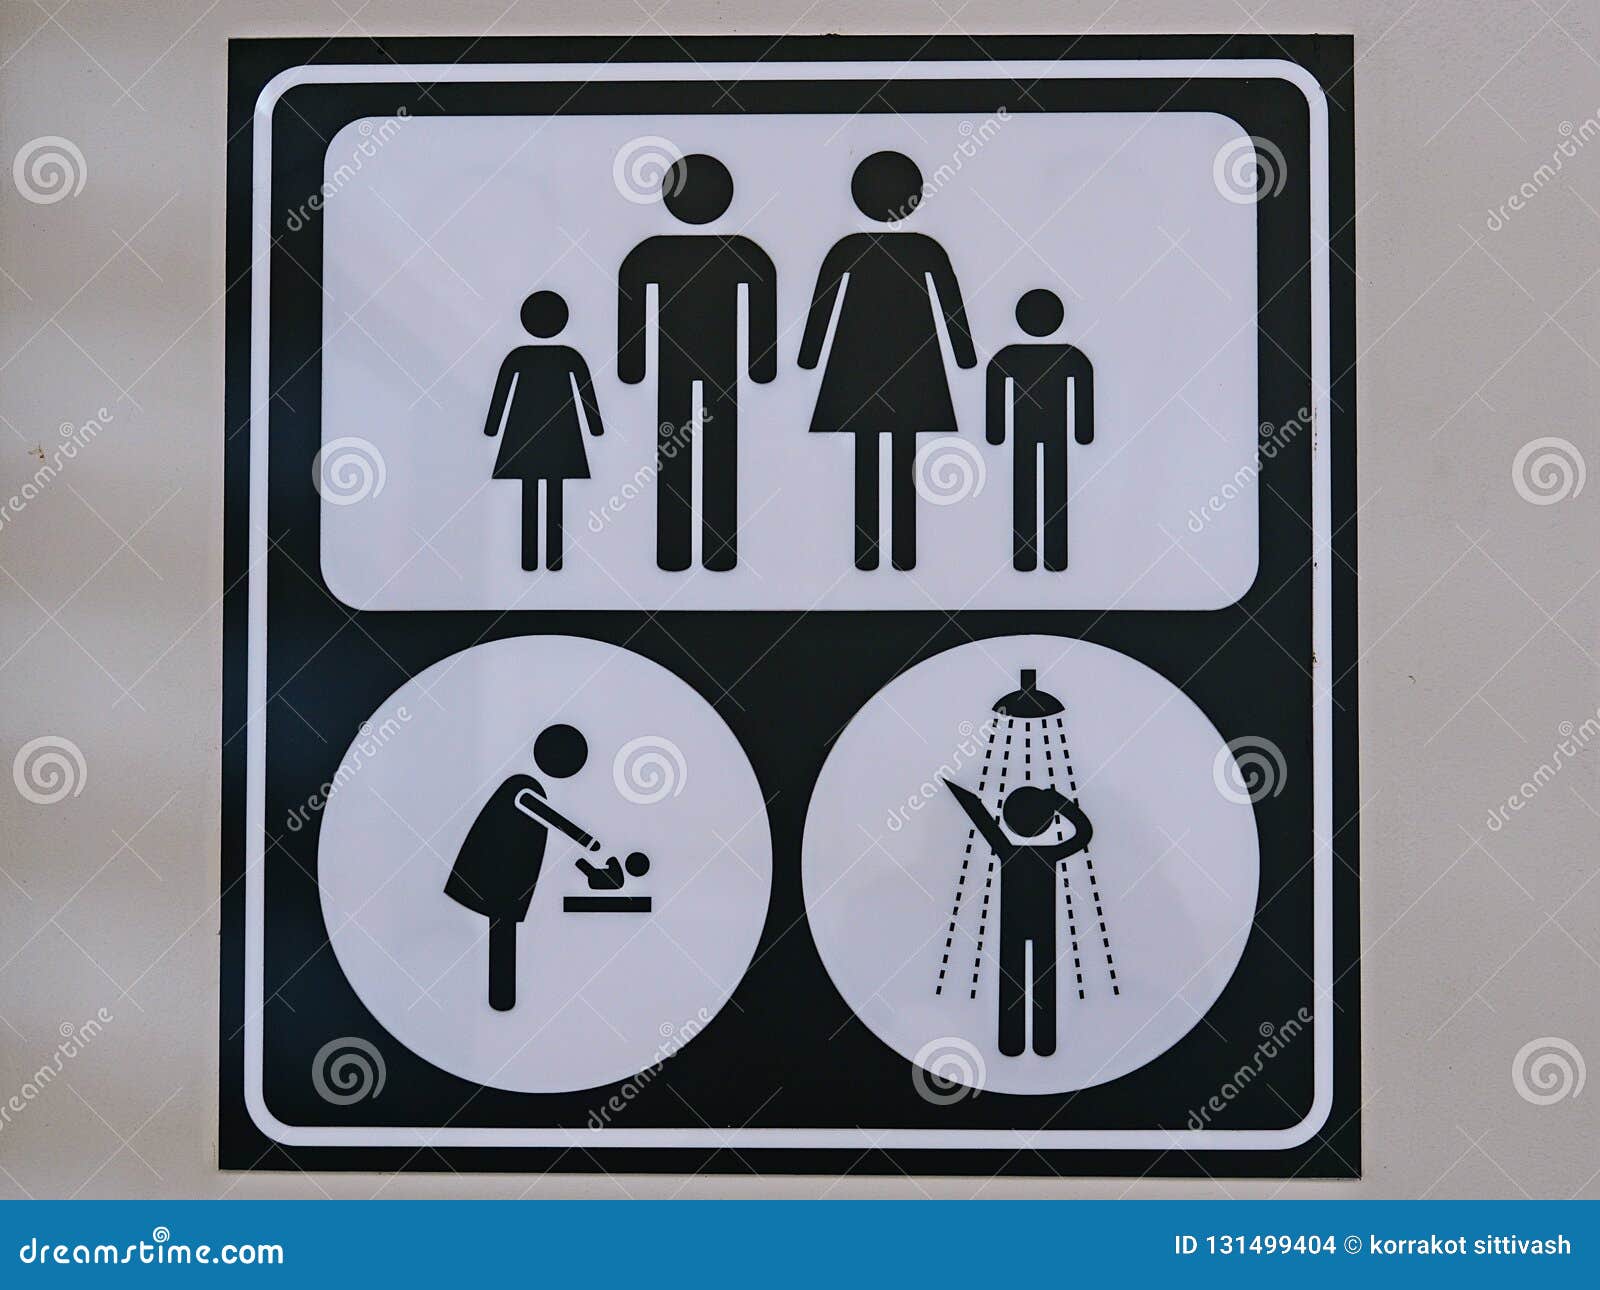 Public Restroom Signs for Men, Women, Children, Family, Diaper Changing ... Man And Woman Bathroom Symbol